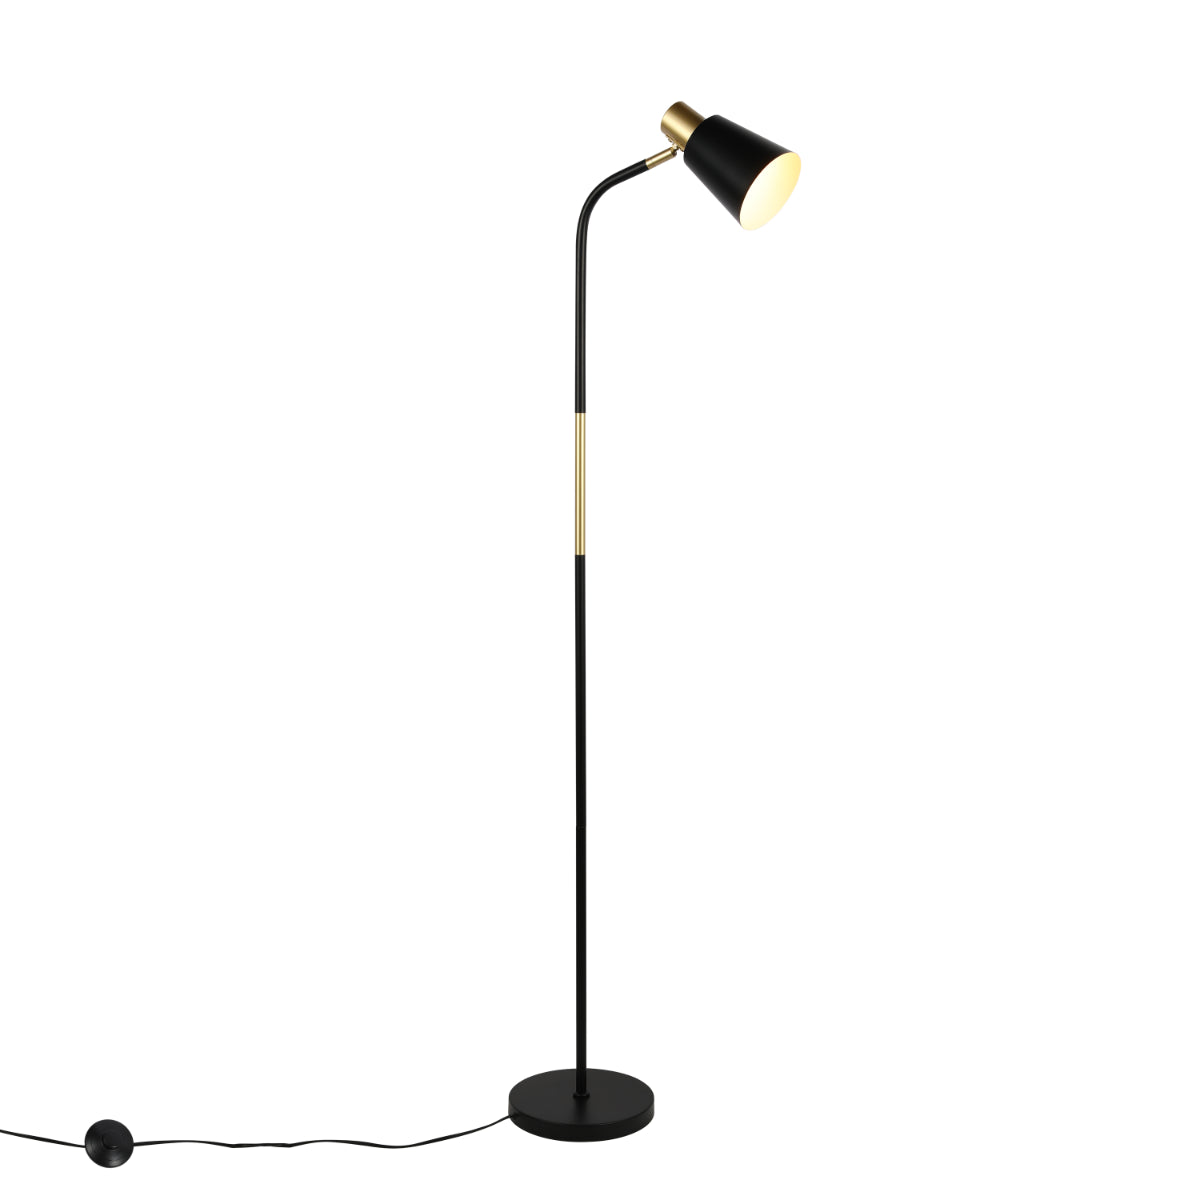 Main image of Bend Design Floor Lamp with Gold Accents - E27 130-03552